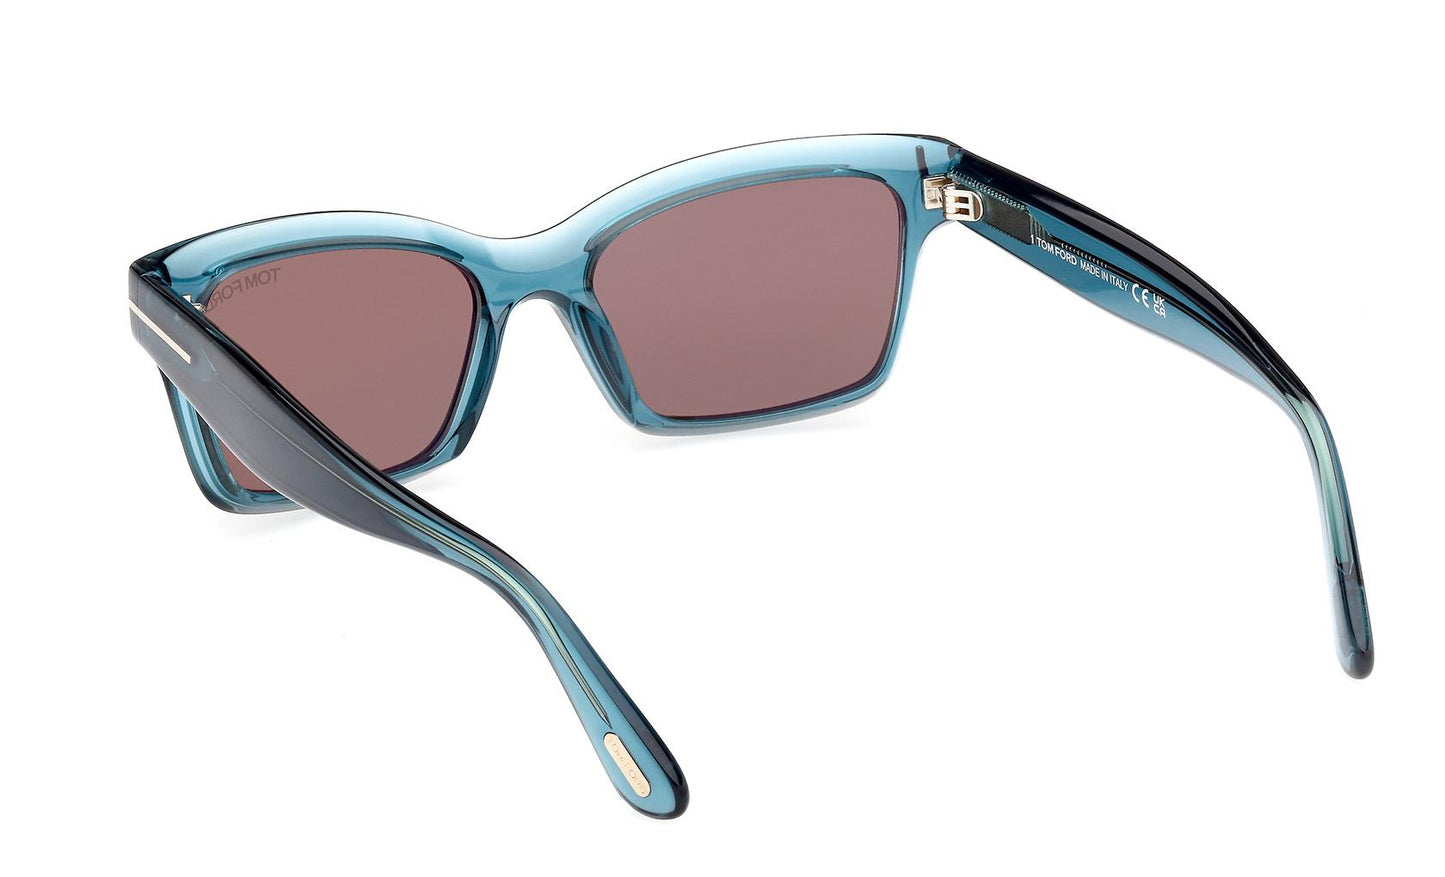 Tom Ford Mikel Sunglasses FT1085 90L